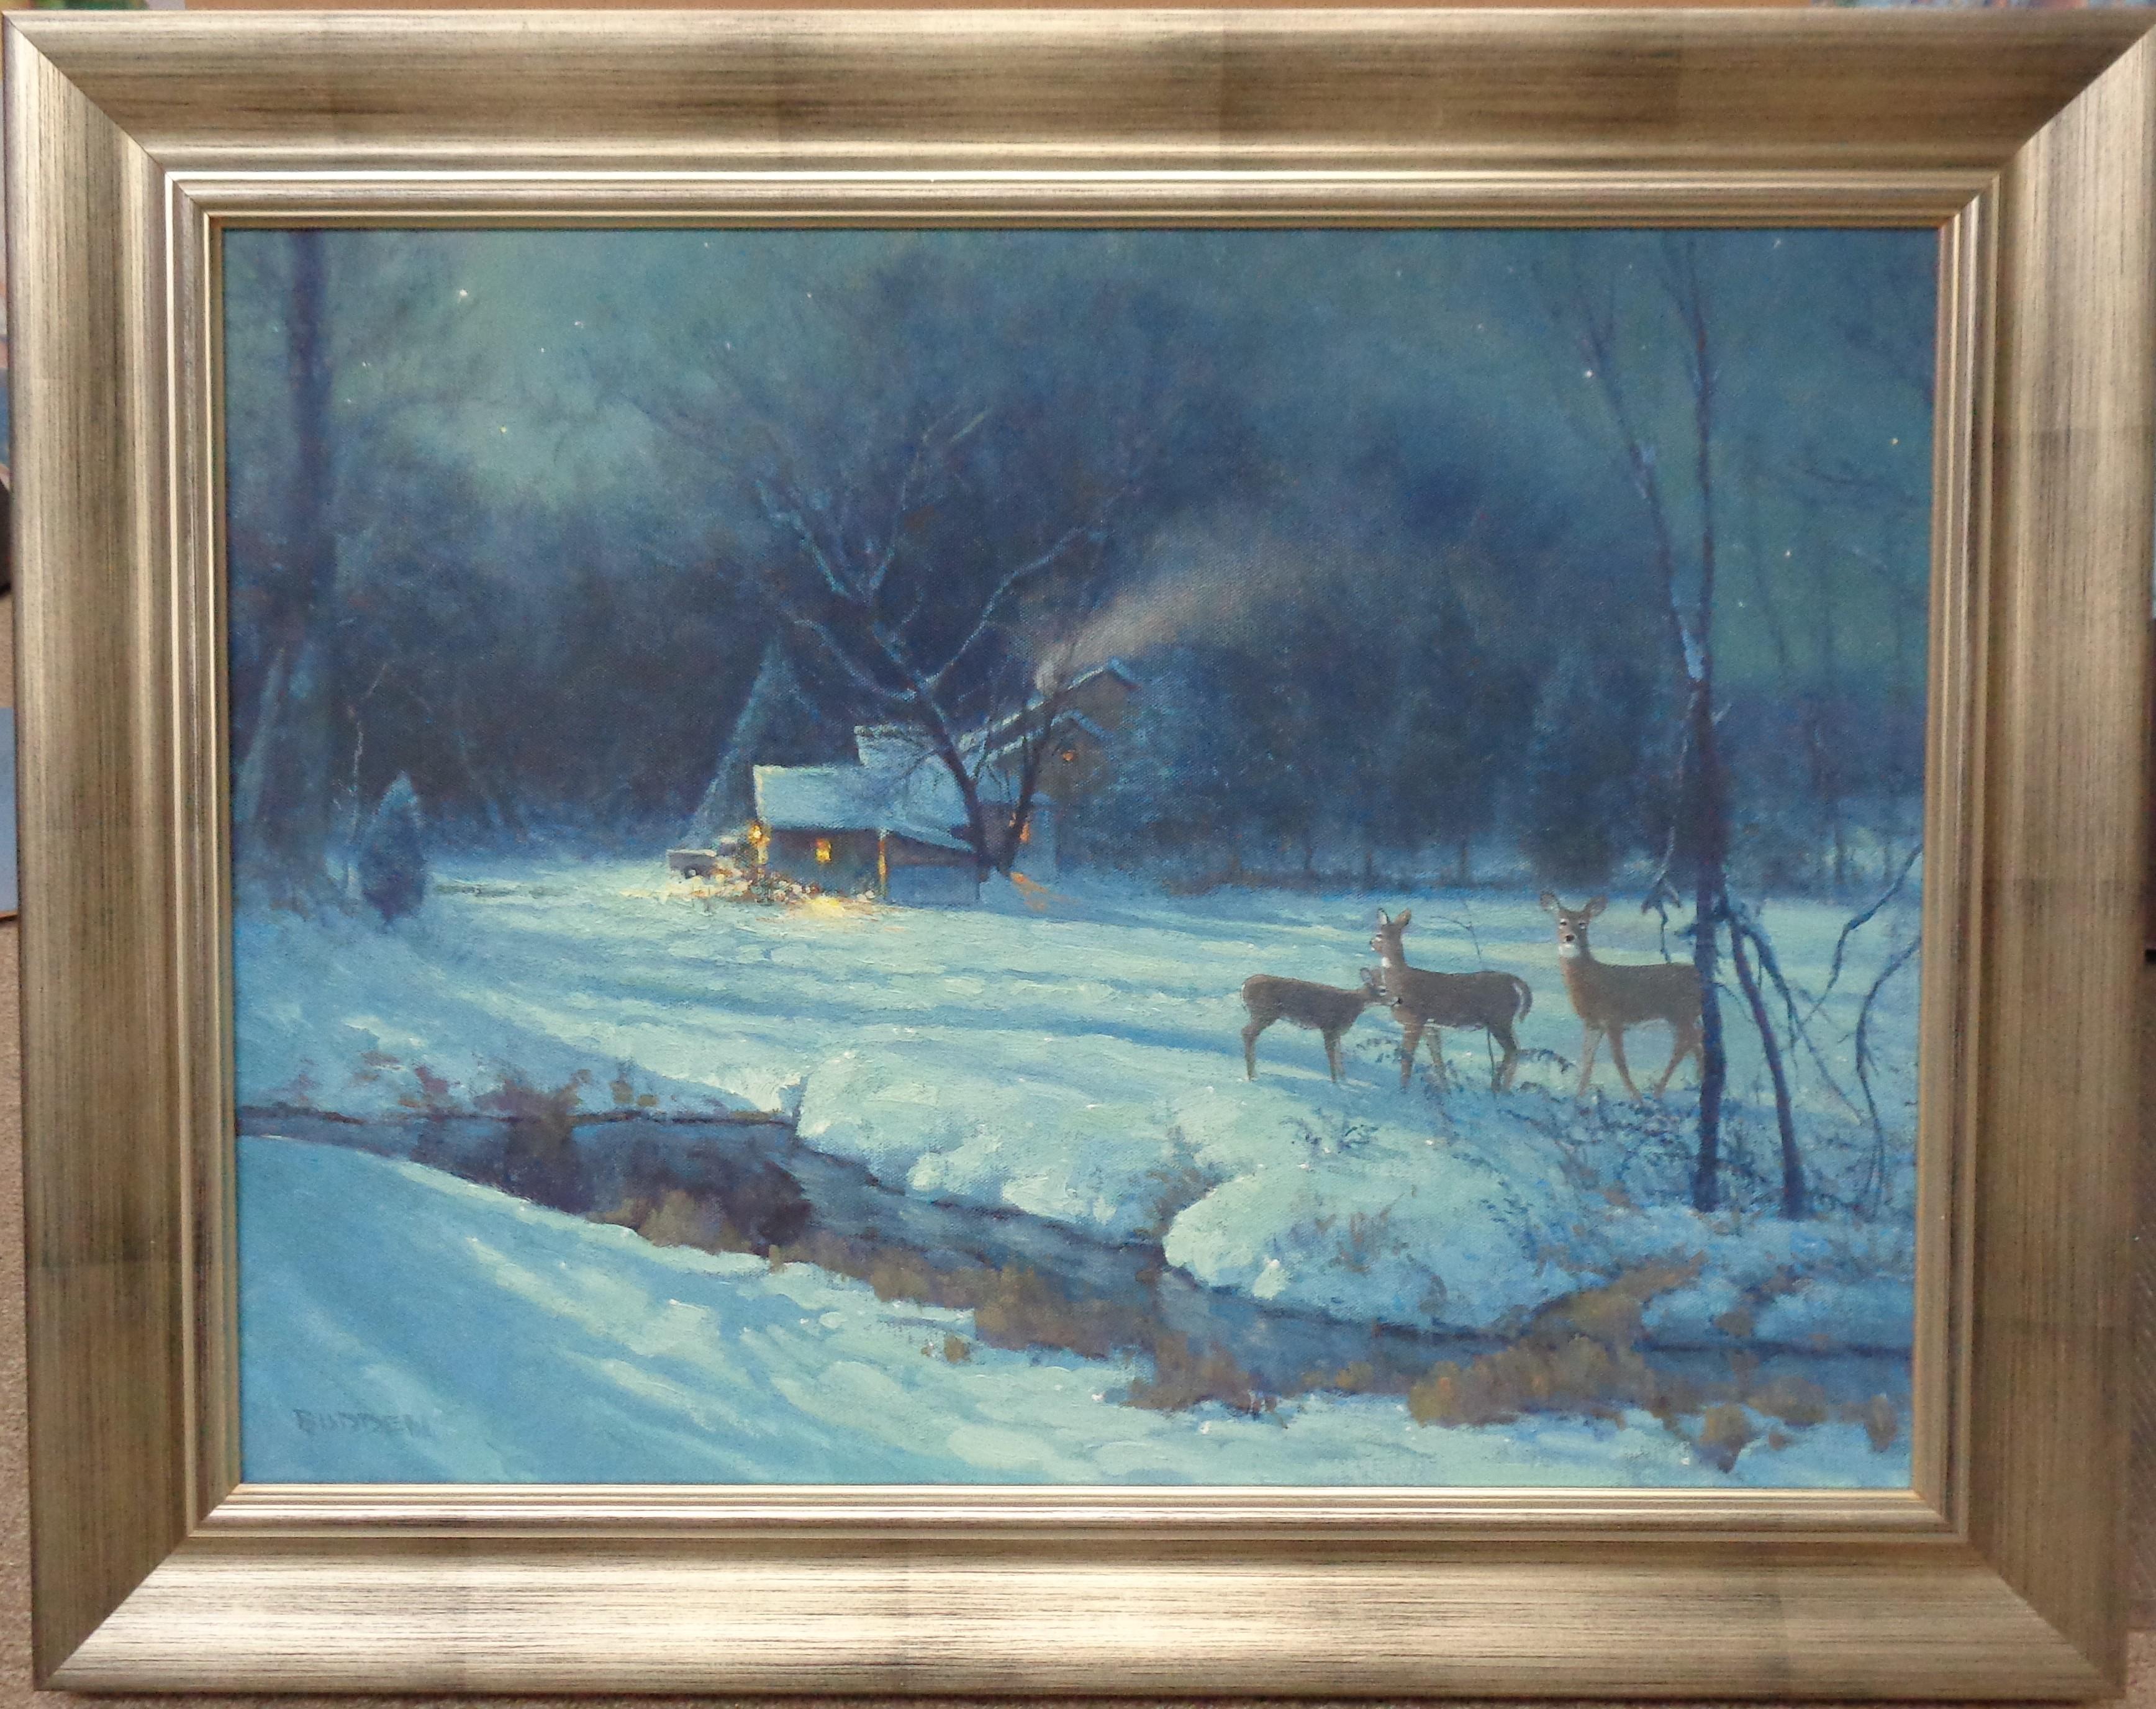 Magical Moment
oil/canvas
18 x 24 image unframed, 23.5 x 29.13 framed
Here is a beautiful winter scene I made up from my imagination as a holiday type of image. It includes a farm with smoke flowing from the chimney,  a snow covered scene with a